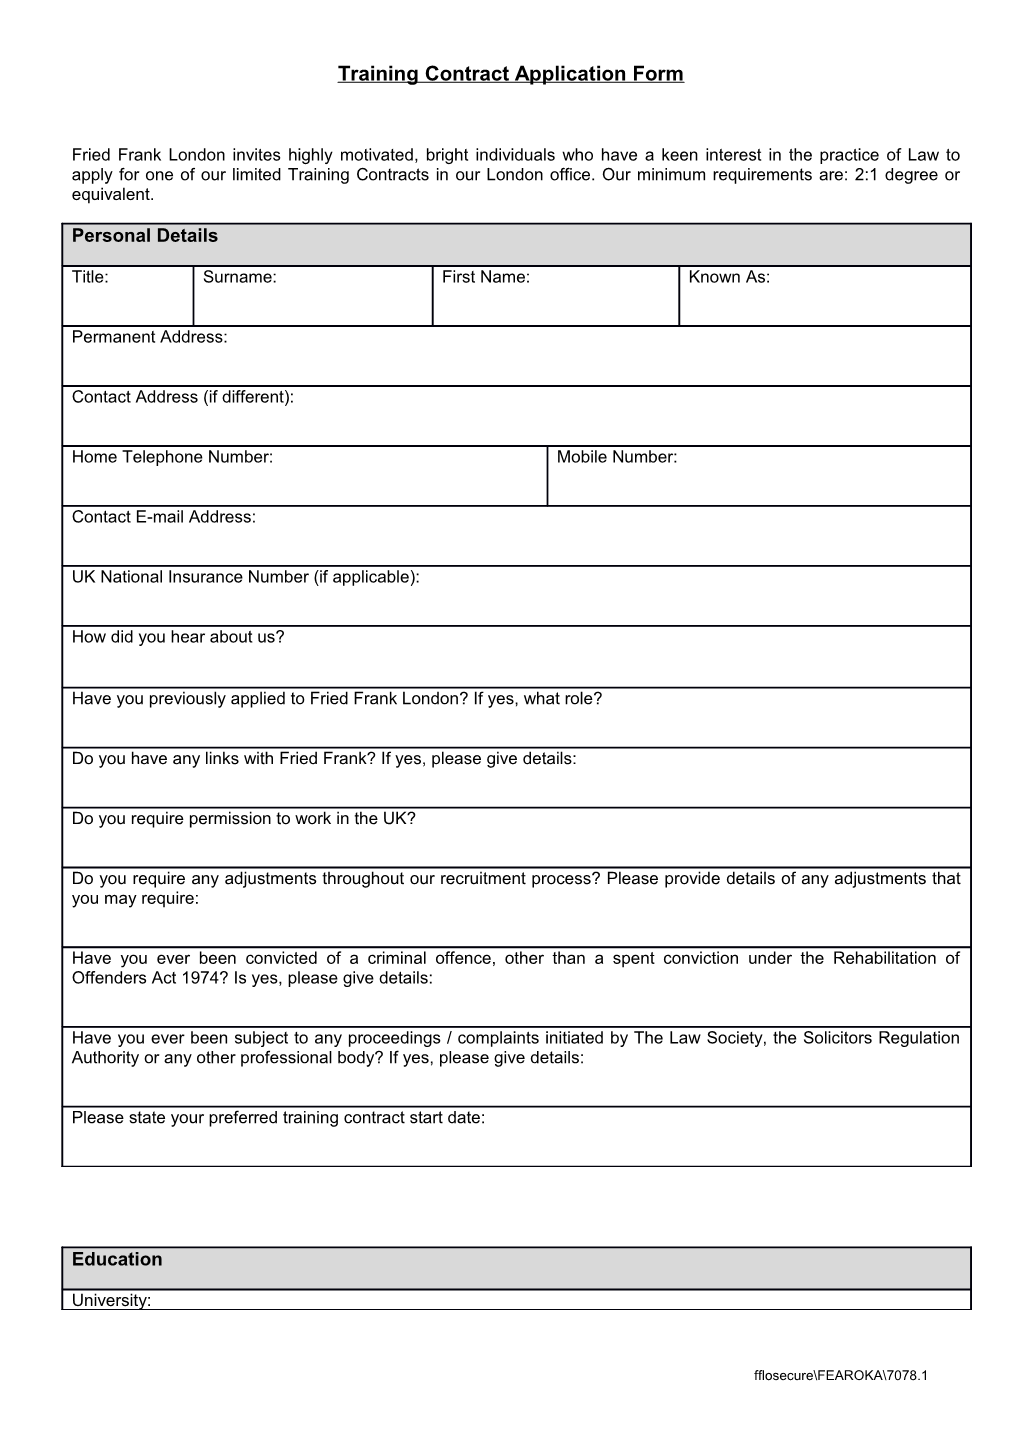 Training Contract Application Form